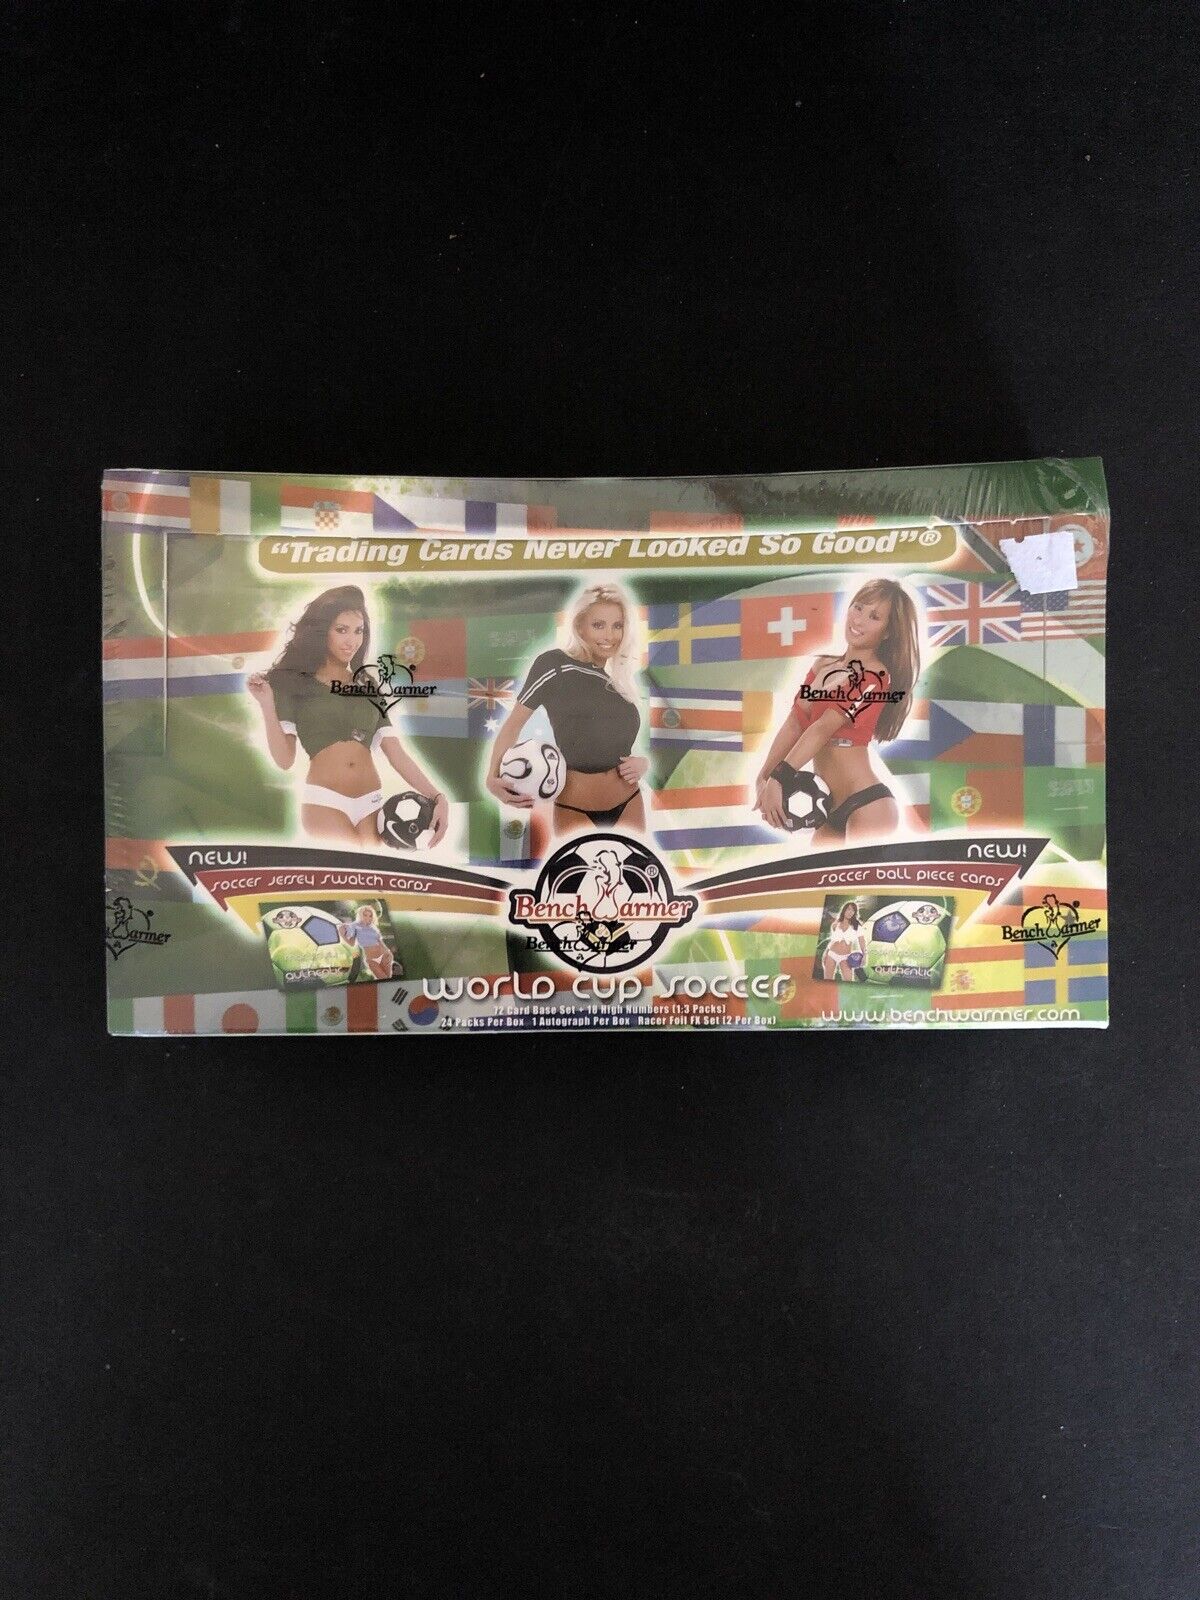 2006 World Cup Soccer Benchwarmer Bench Warmer Cards-New, Sealed Box